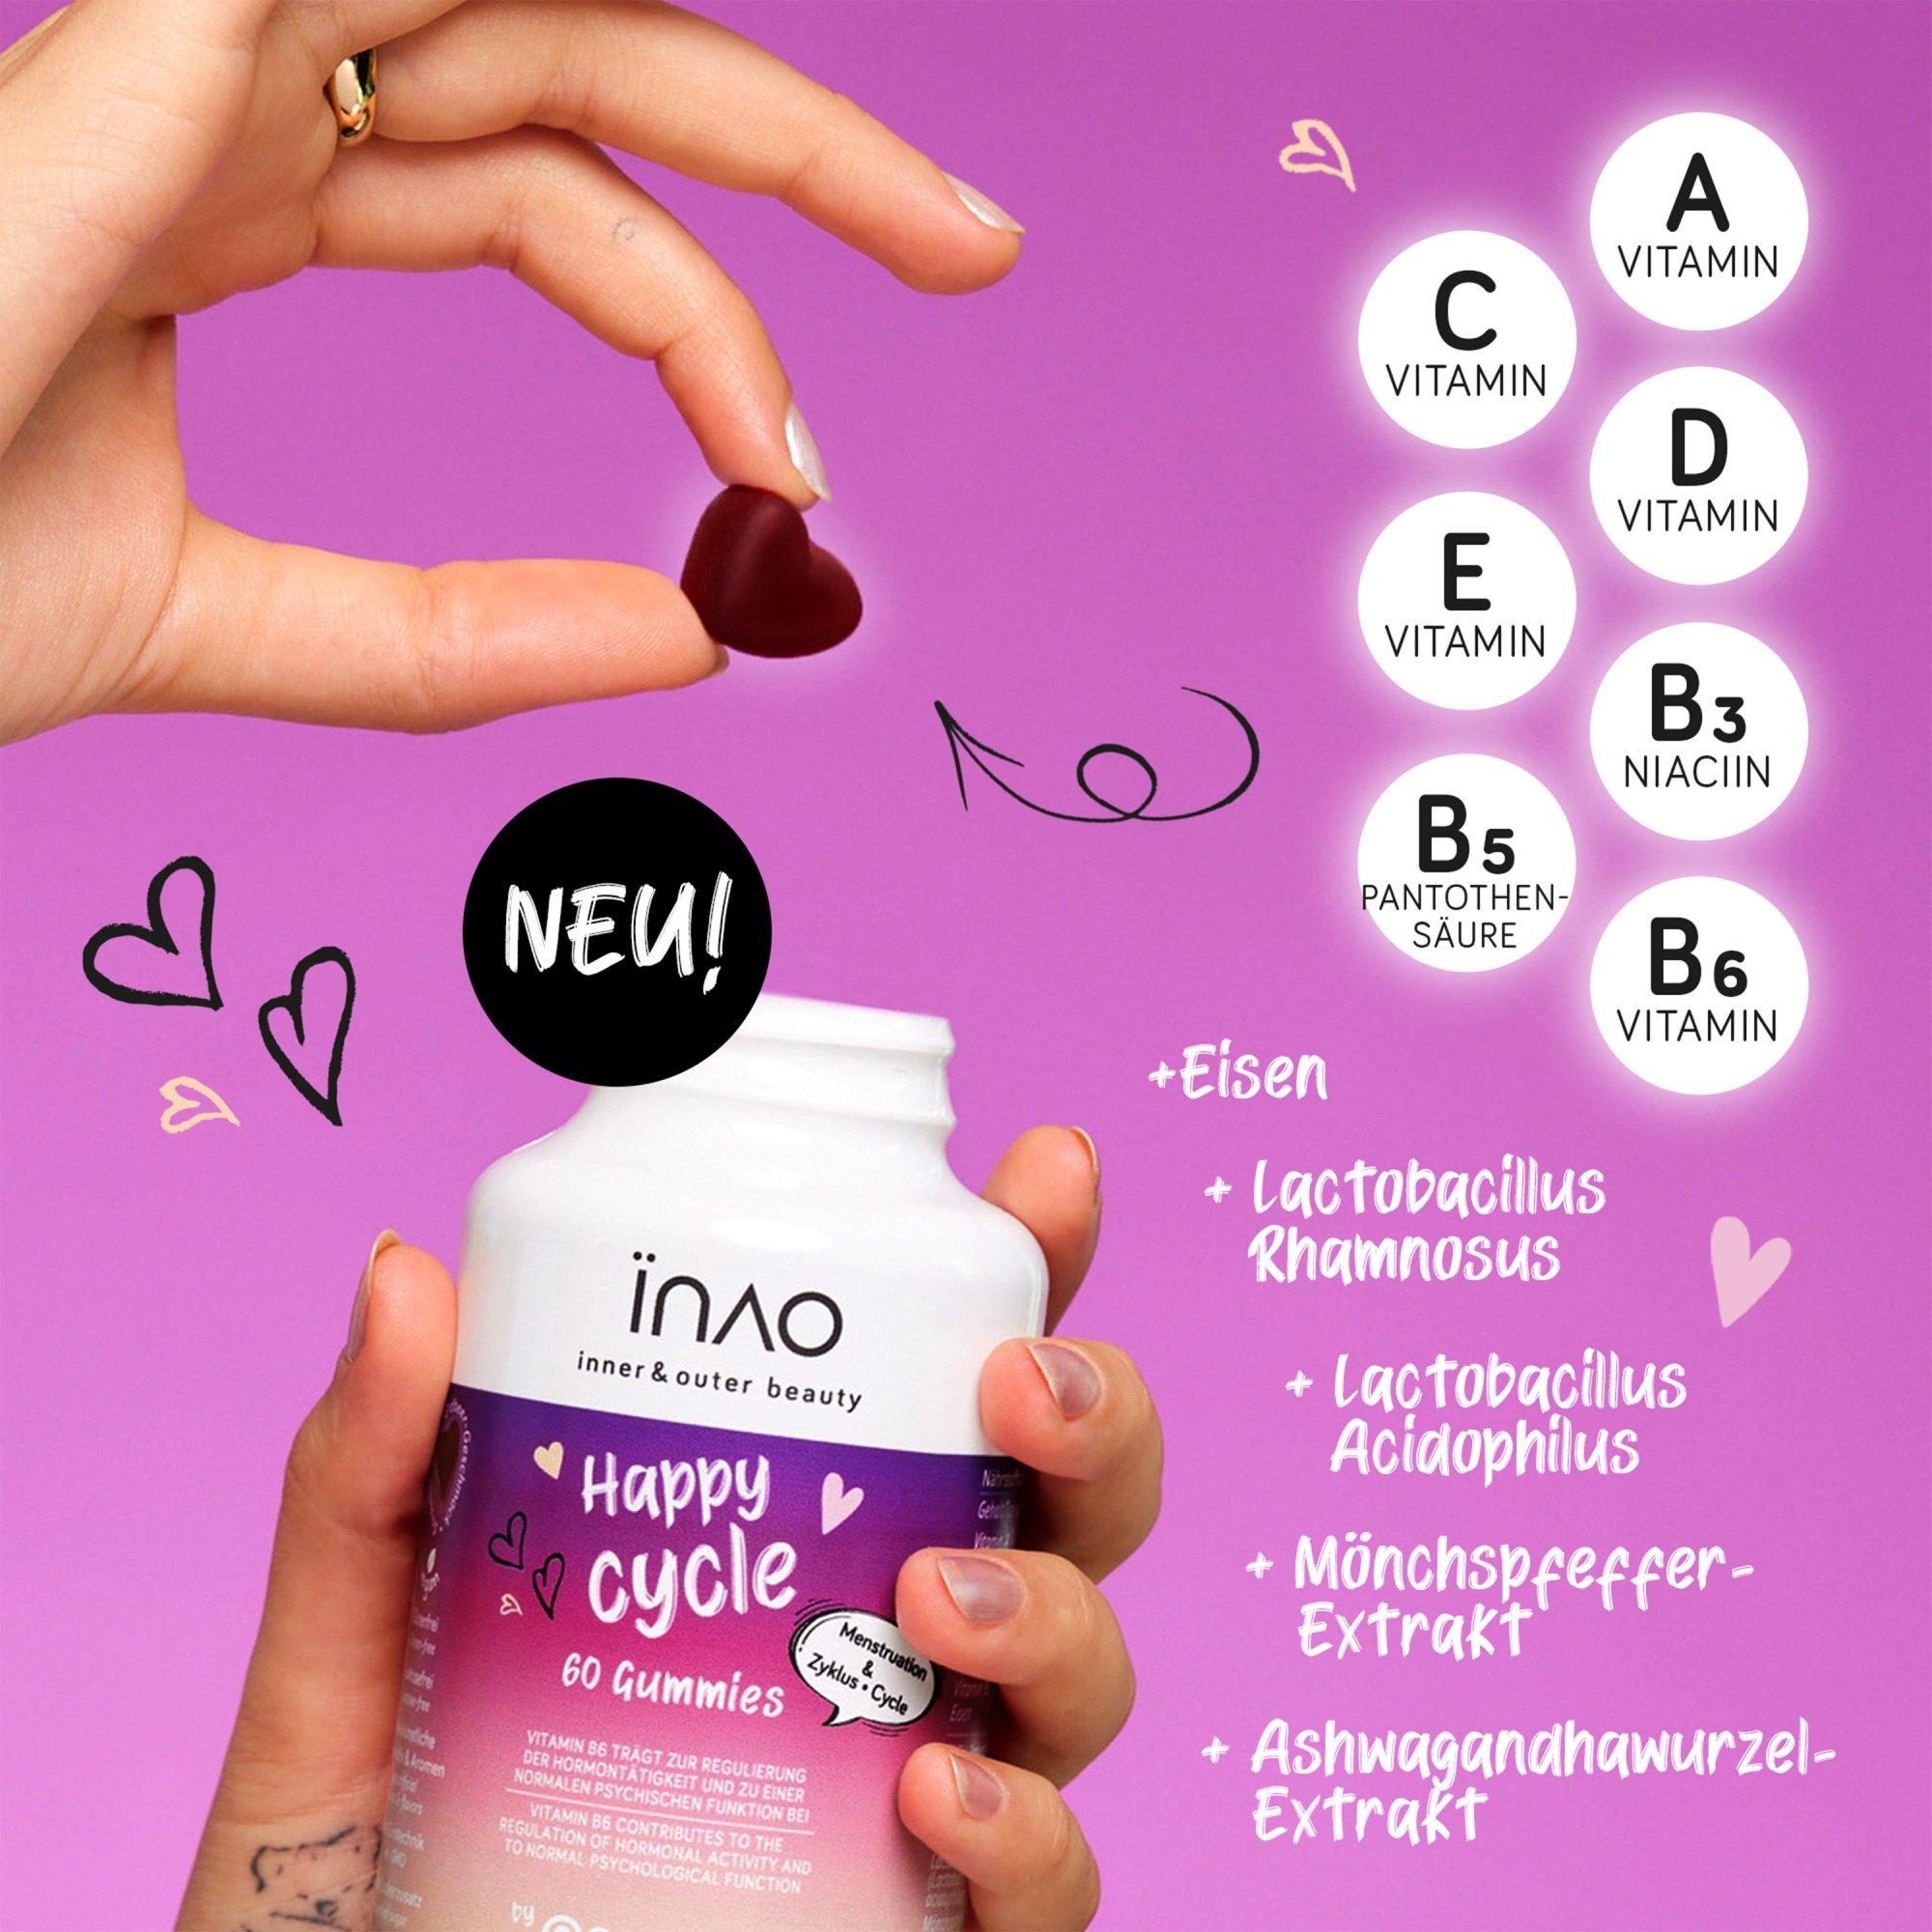 INAO inner and outer beauty Happy Cycle gummies by essence